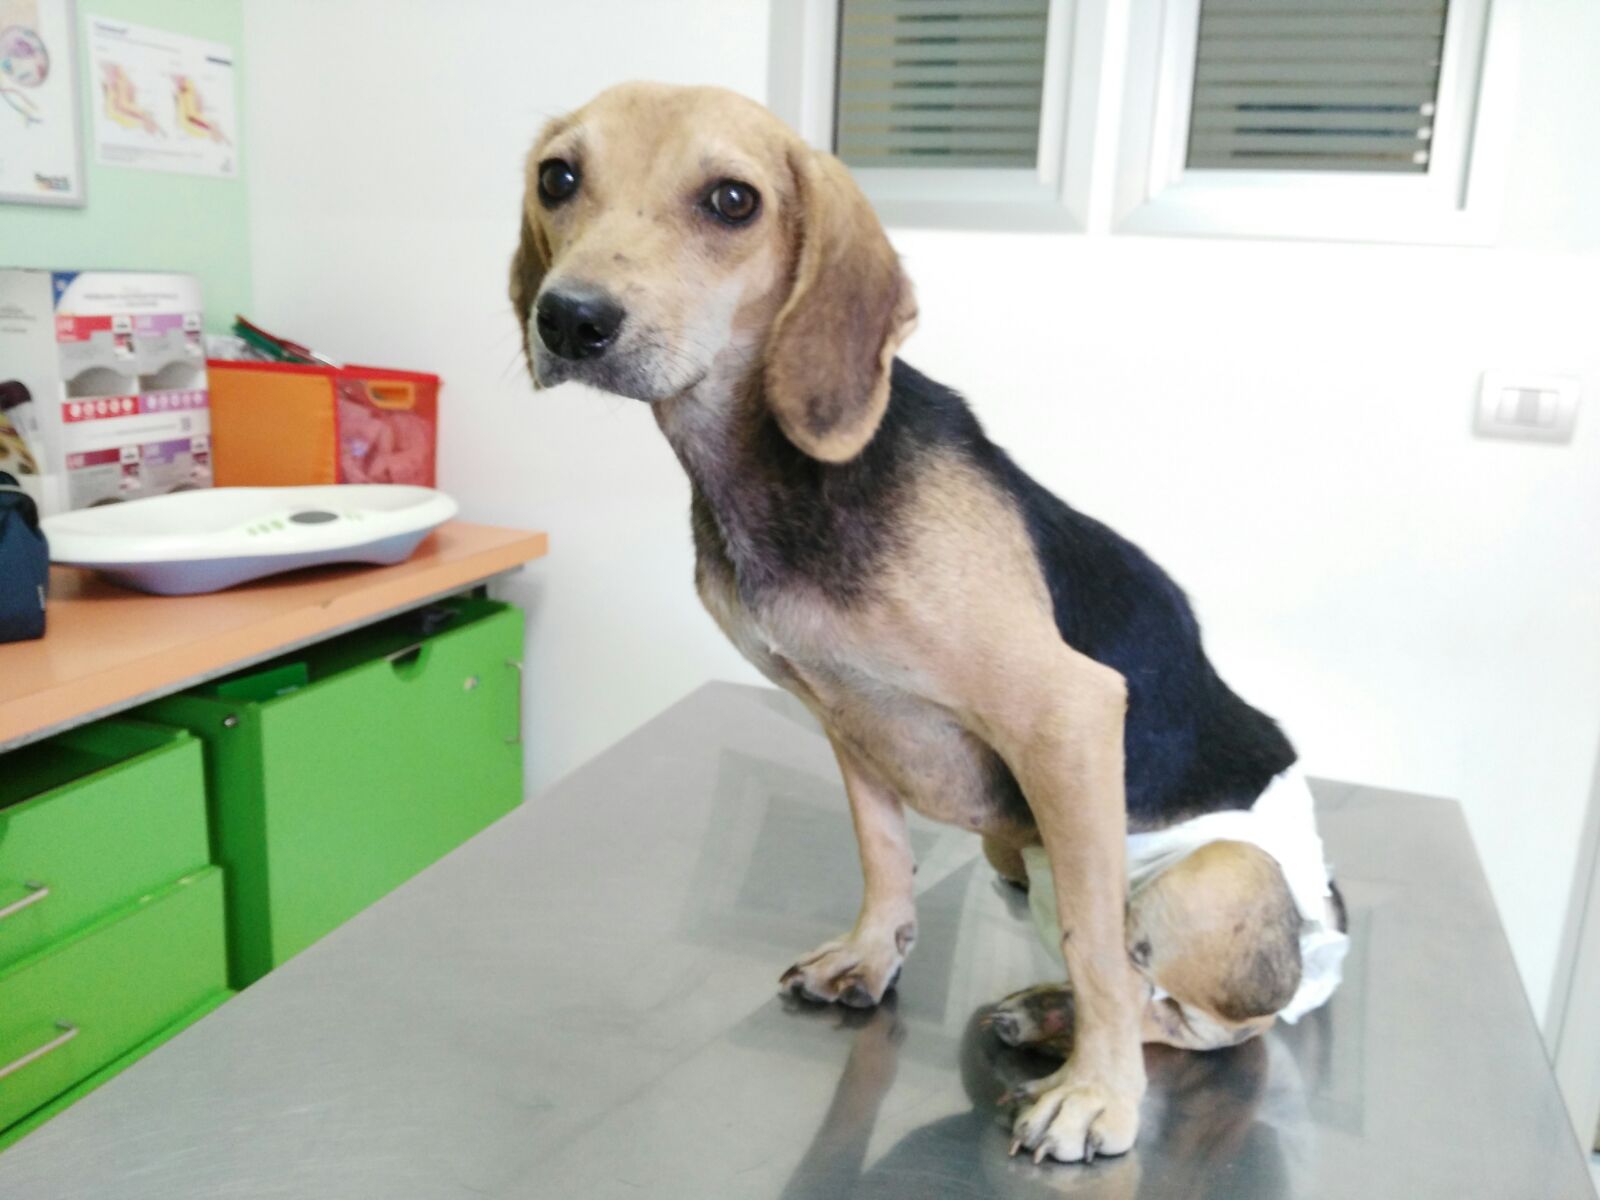 THE NEW LIFE OF SNOOPY: THANKS TO YOURS DONATIONS SNOOPY HAS BEEN CURED. NOW HE IS BETTER AND HE HAVE FOUND A SPECIAL ADOPTION